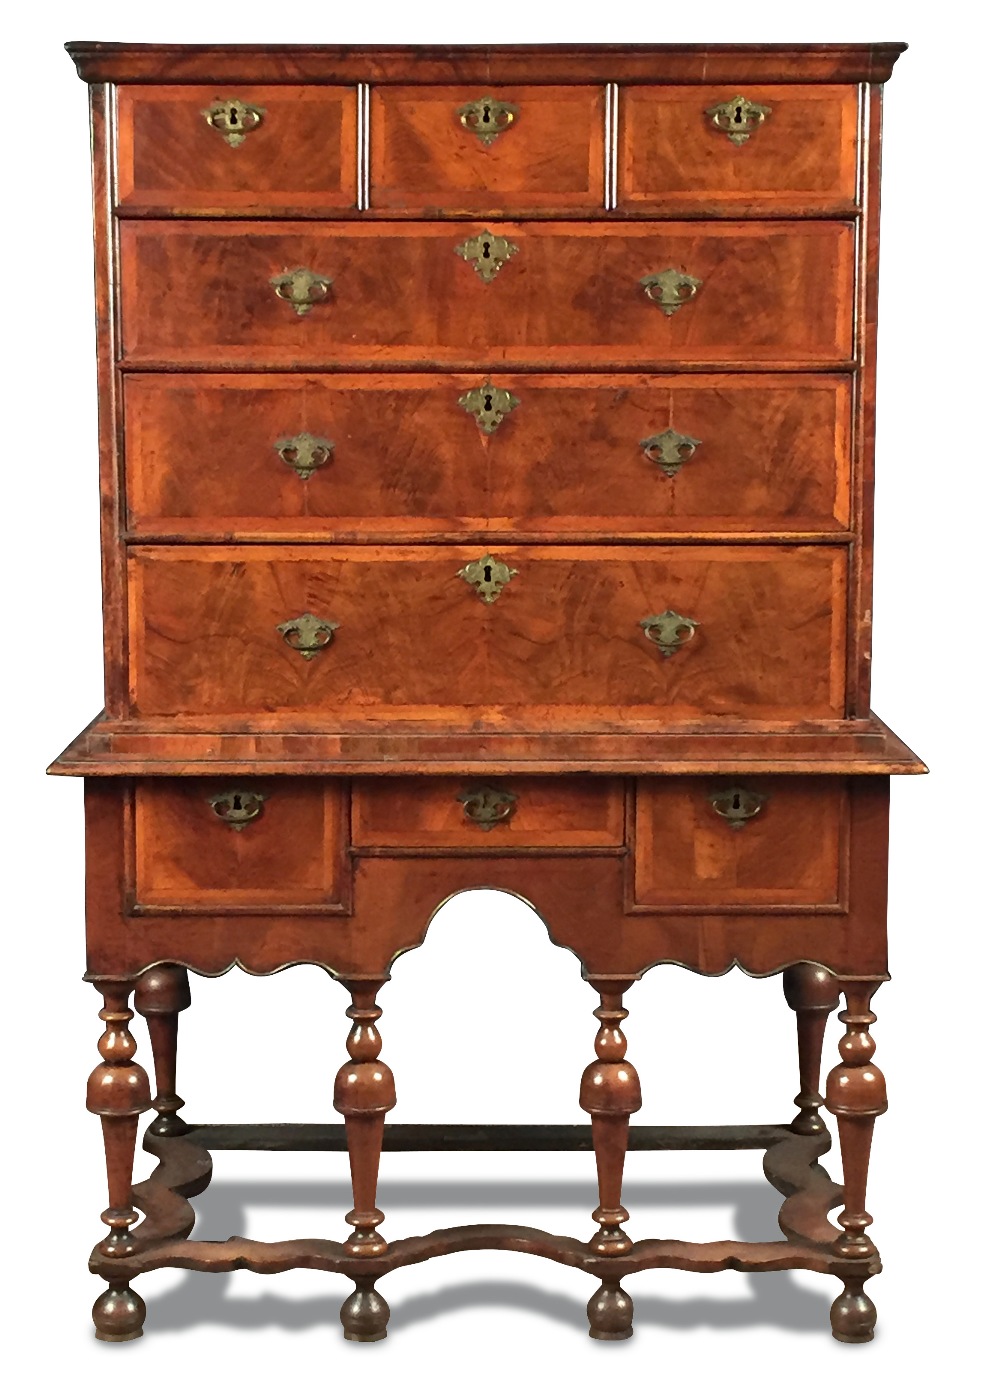 An early 18th century walnut chest on stand, banded border decoration to the drawer fronts and